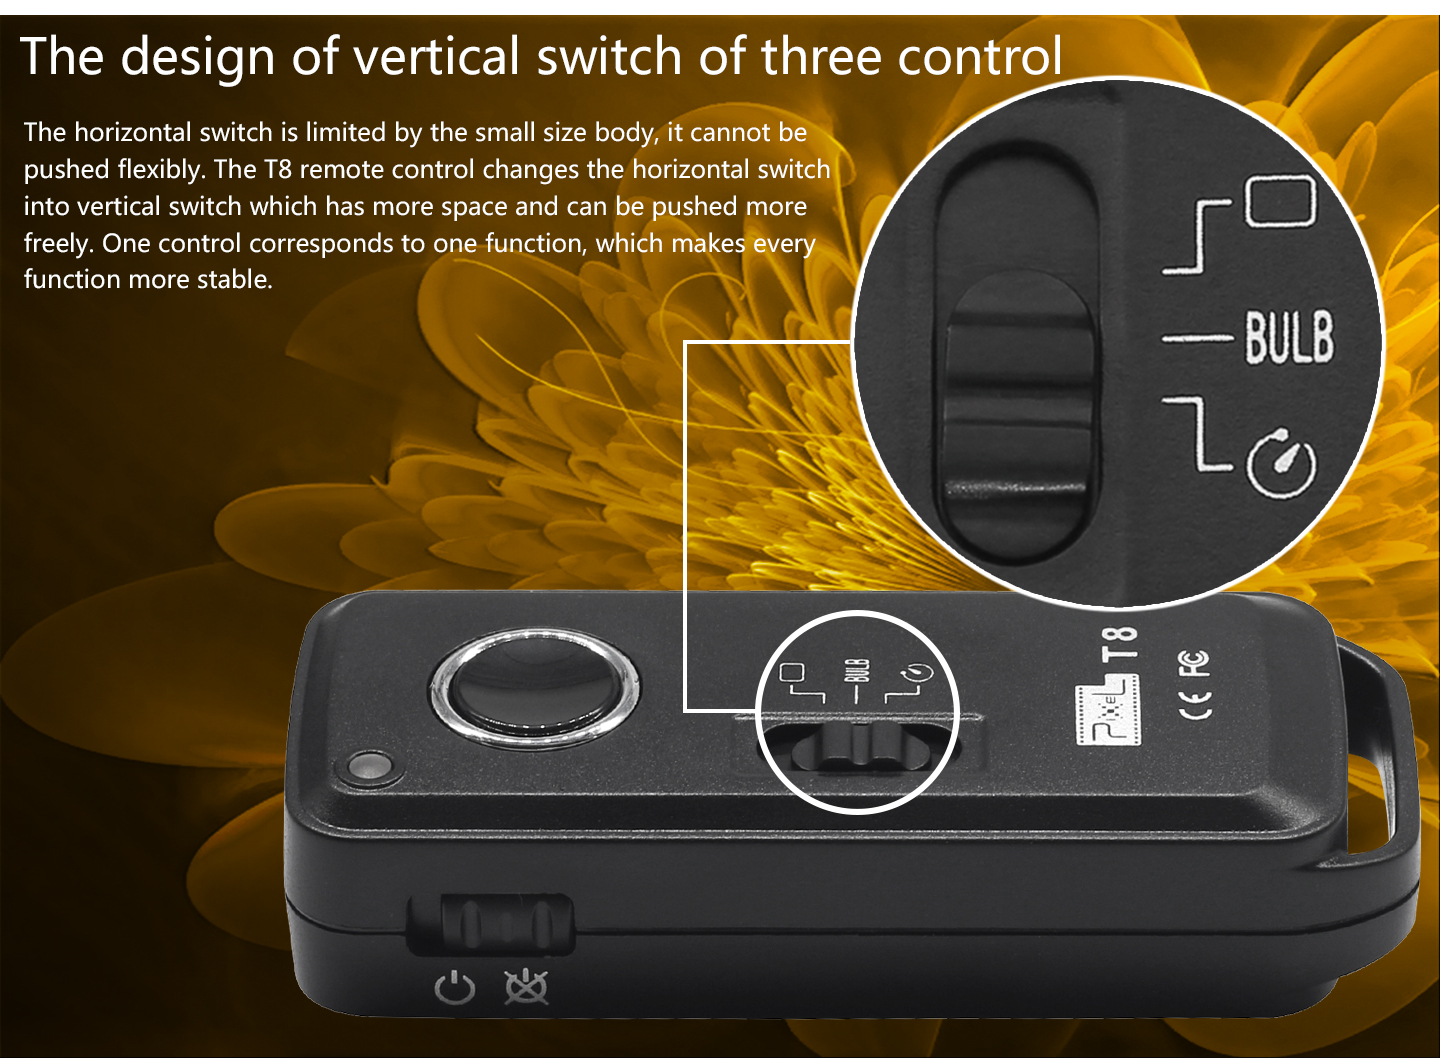 The design of vertical switch of three control